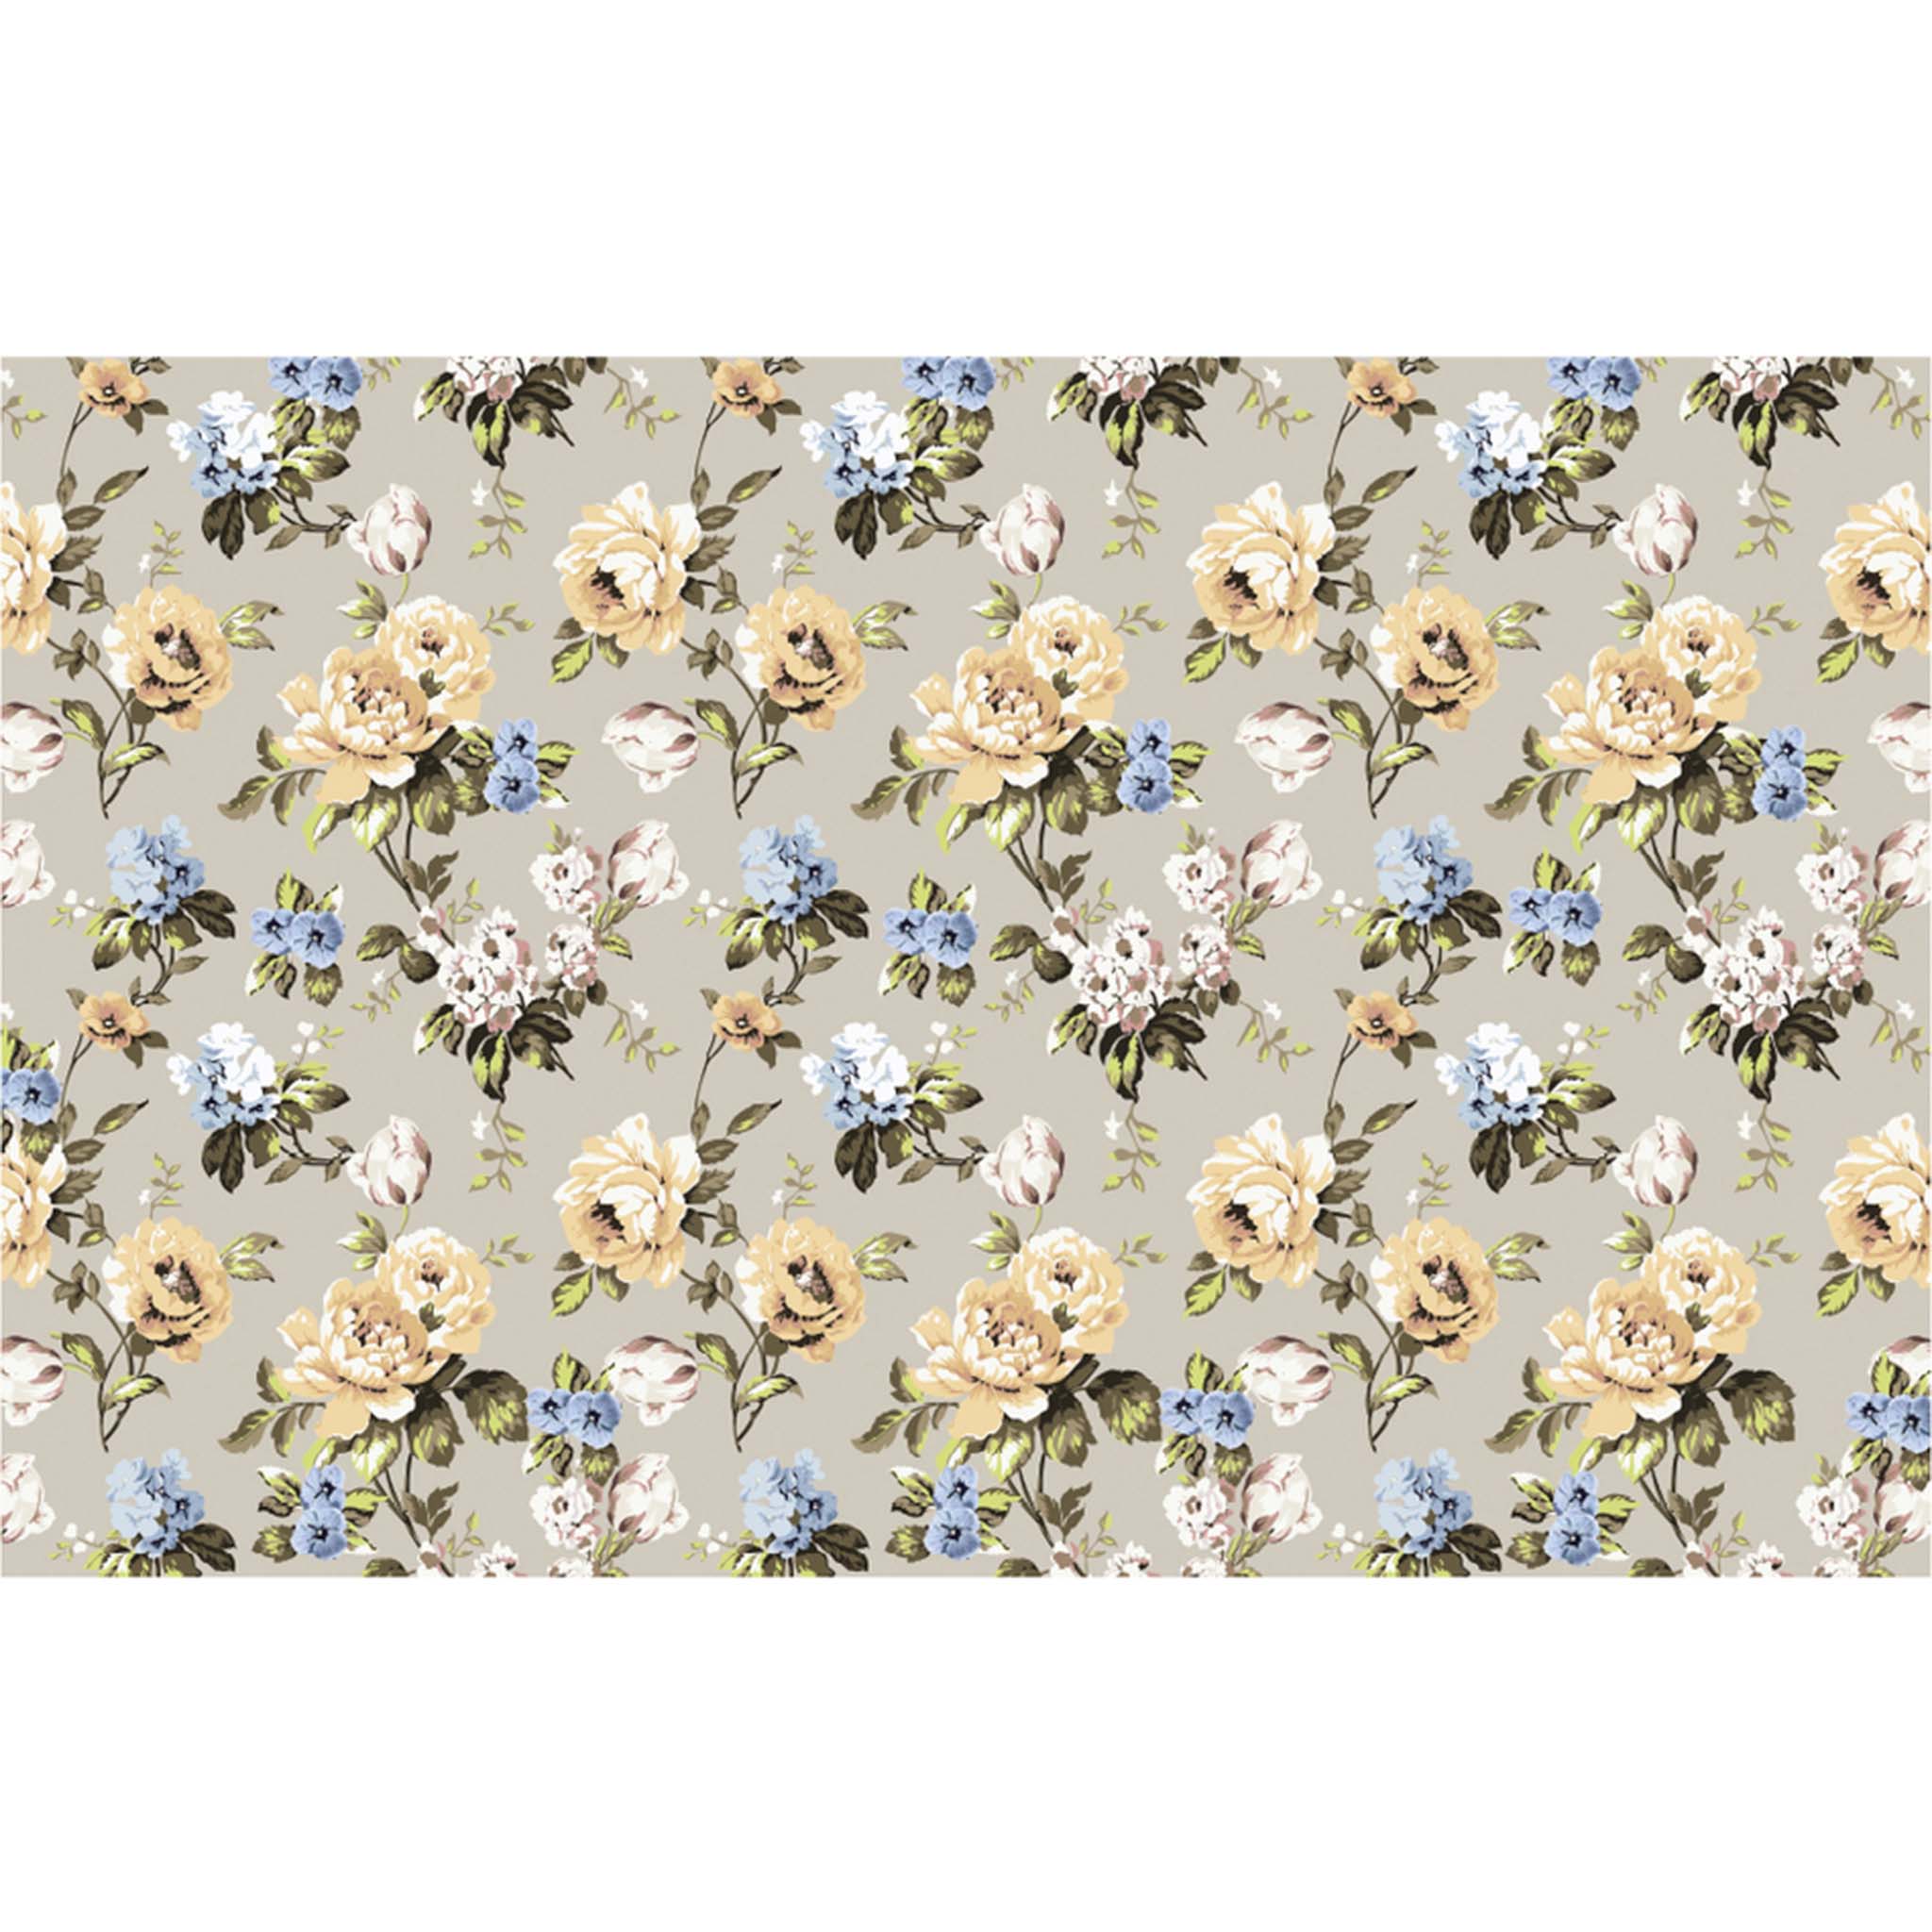 yellow, blue and white flowers painted against a beige background.